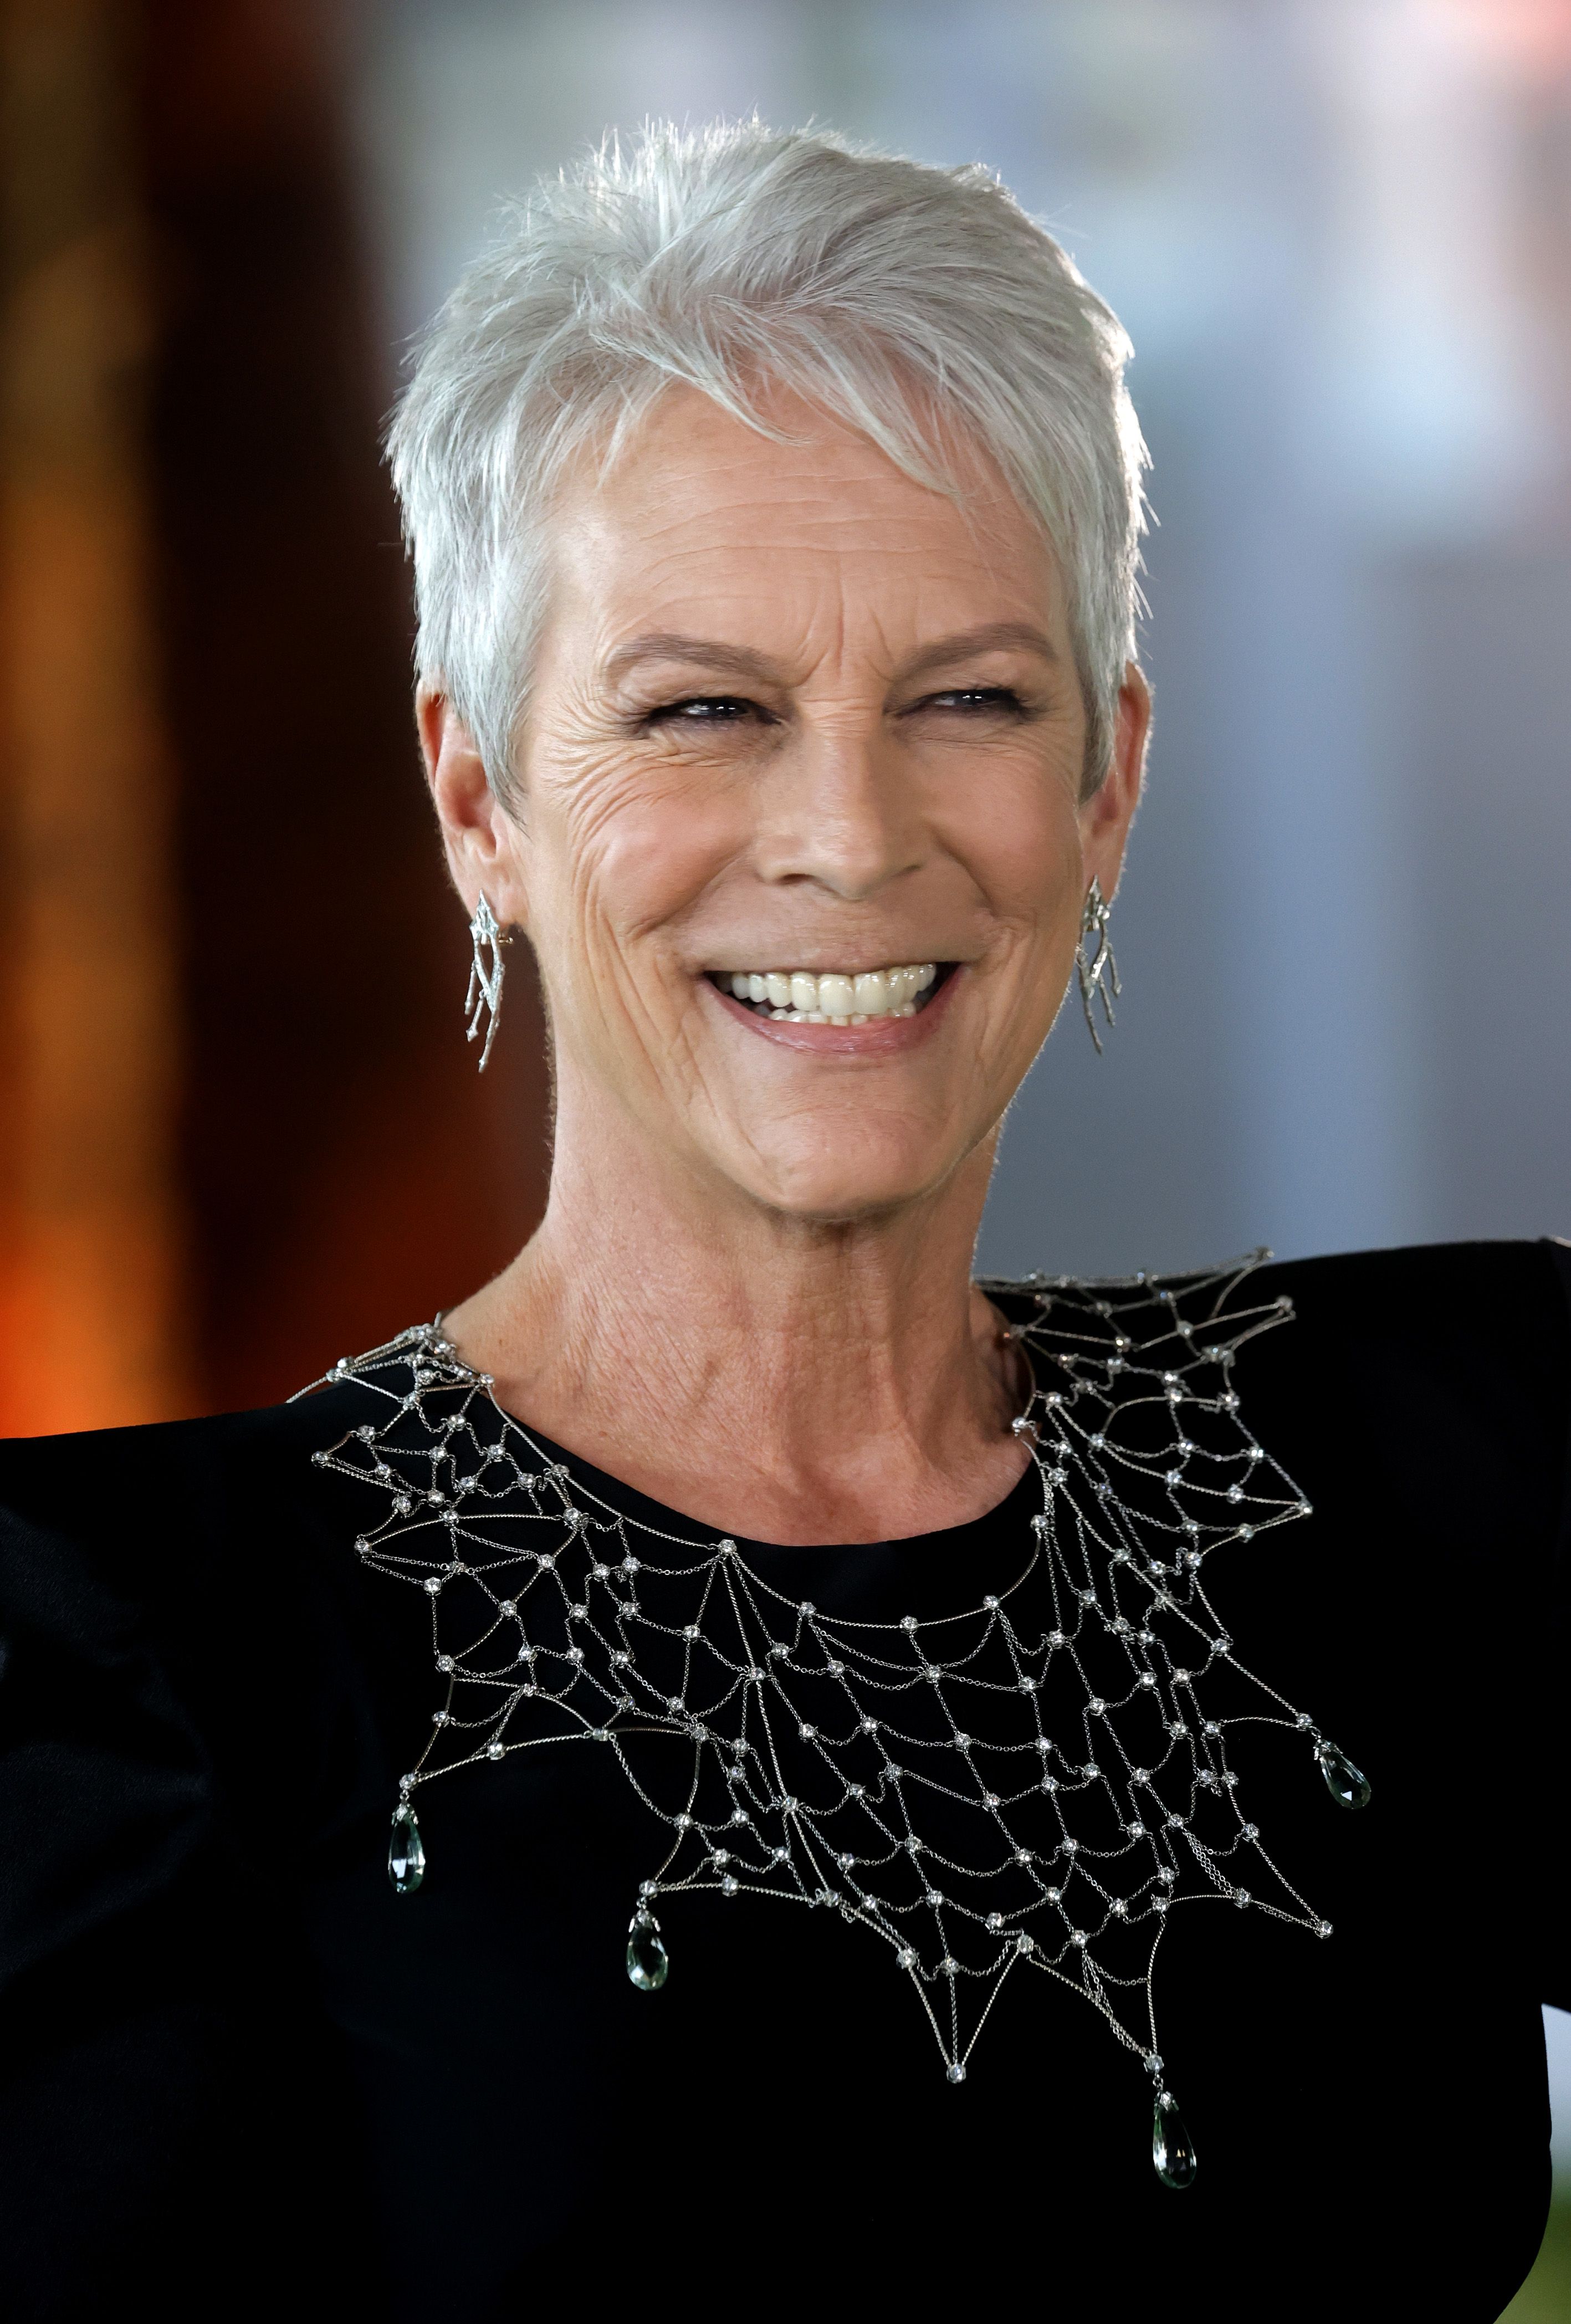 Jamie Lee Curtis Discusses 'Unflattering' Angles and Aging on IG